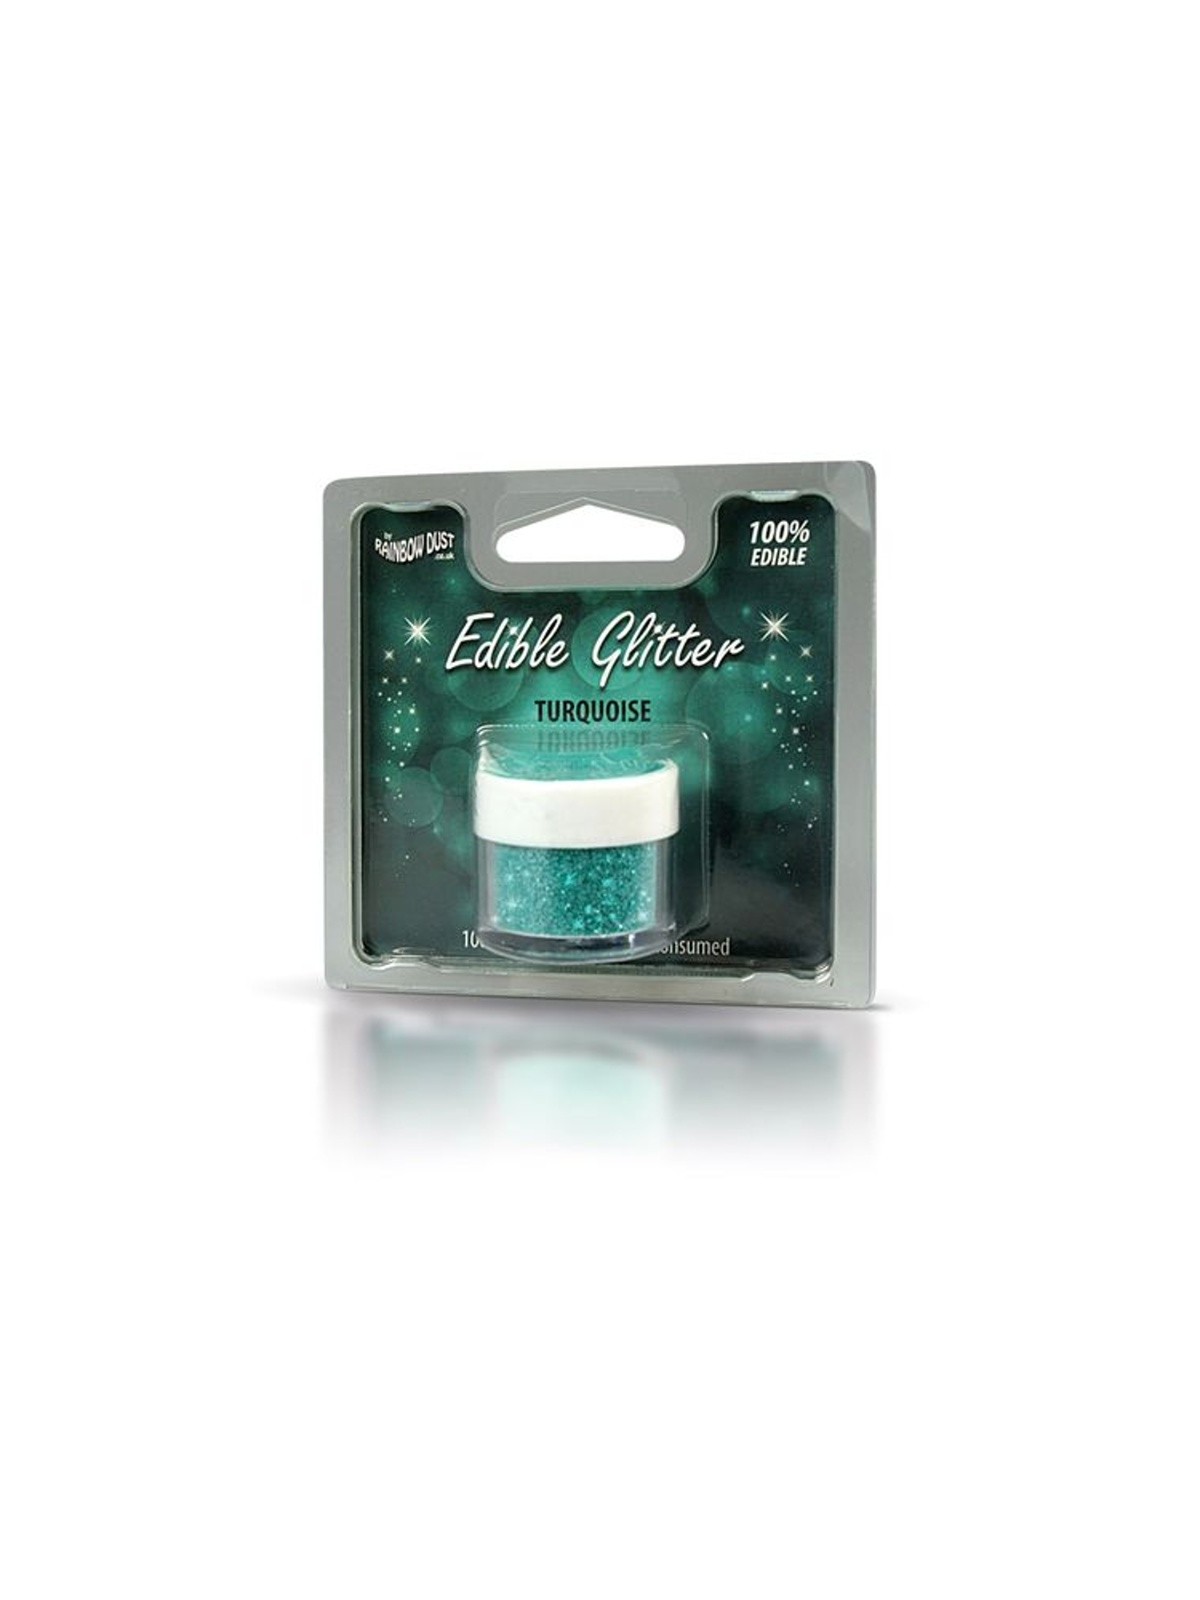 RD Edible Glitter - Turquoise 5g